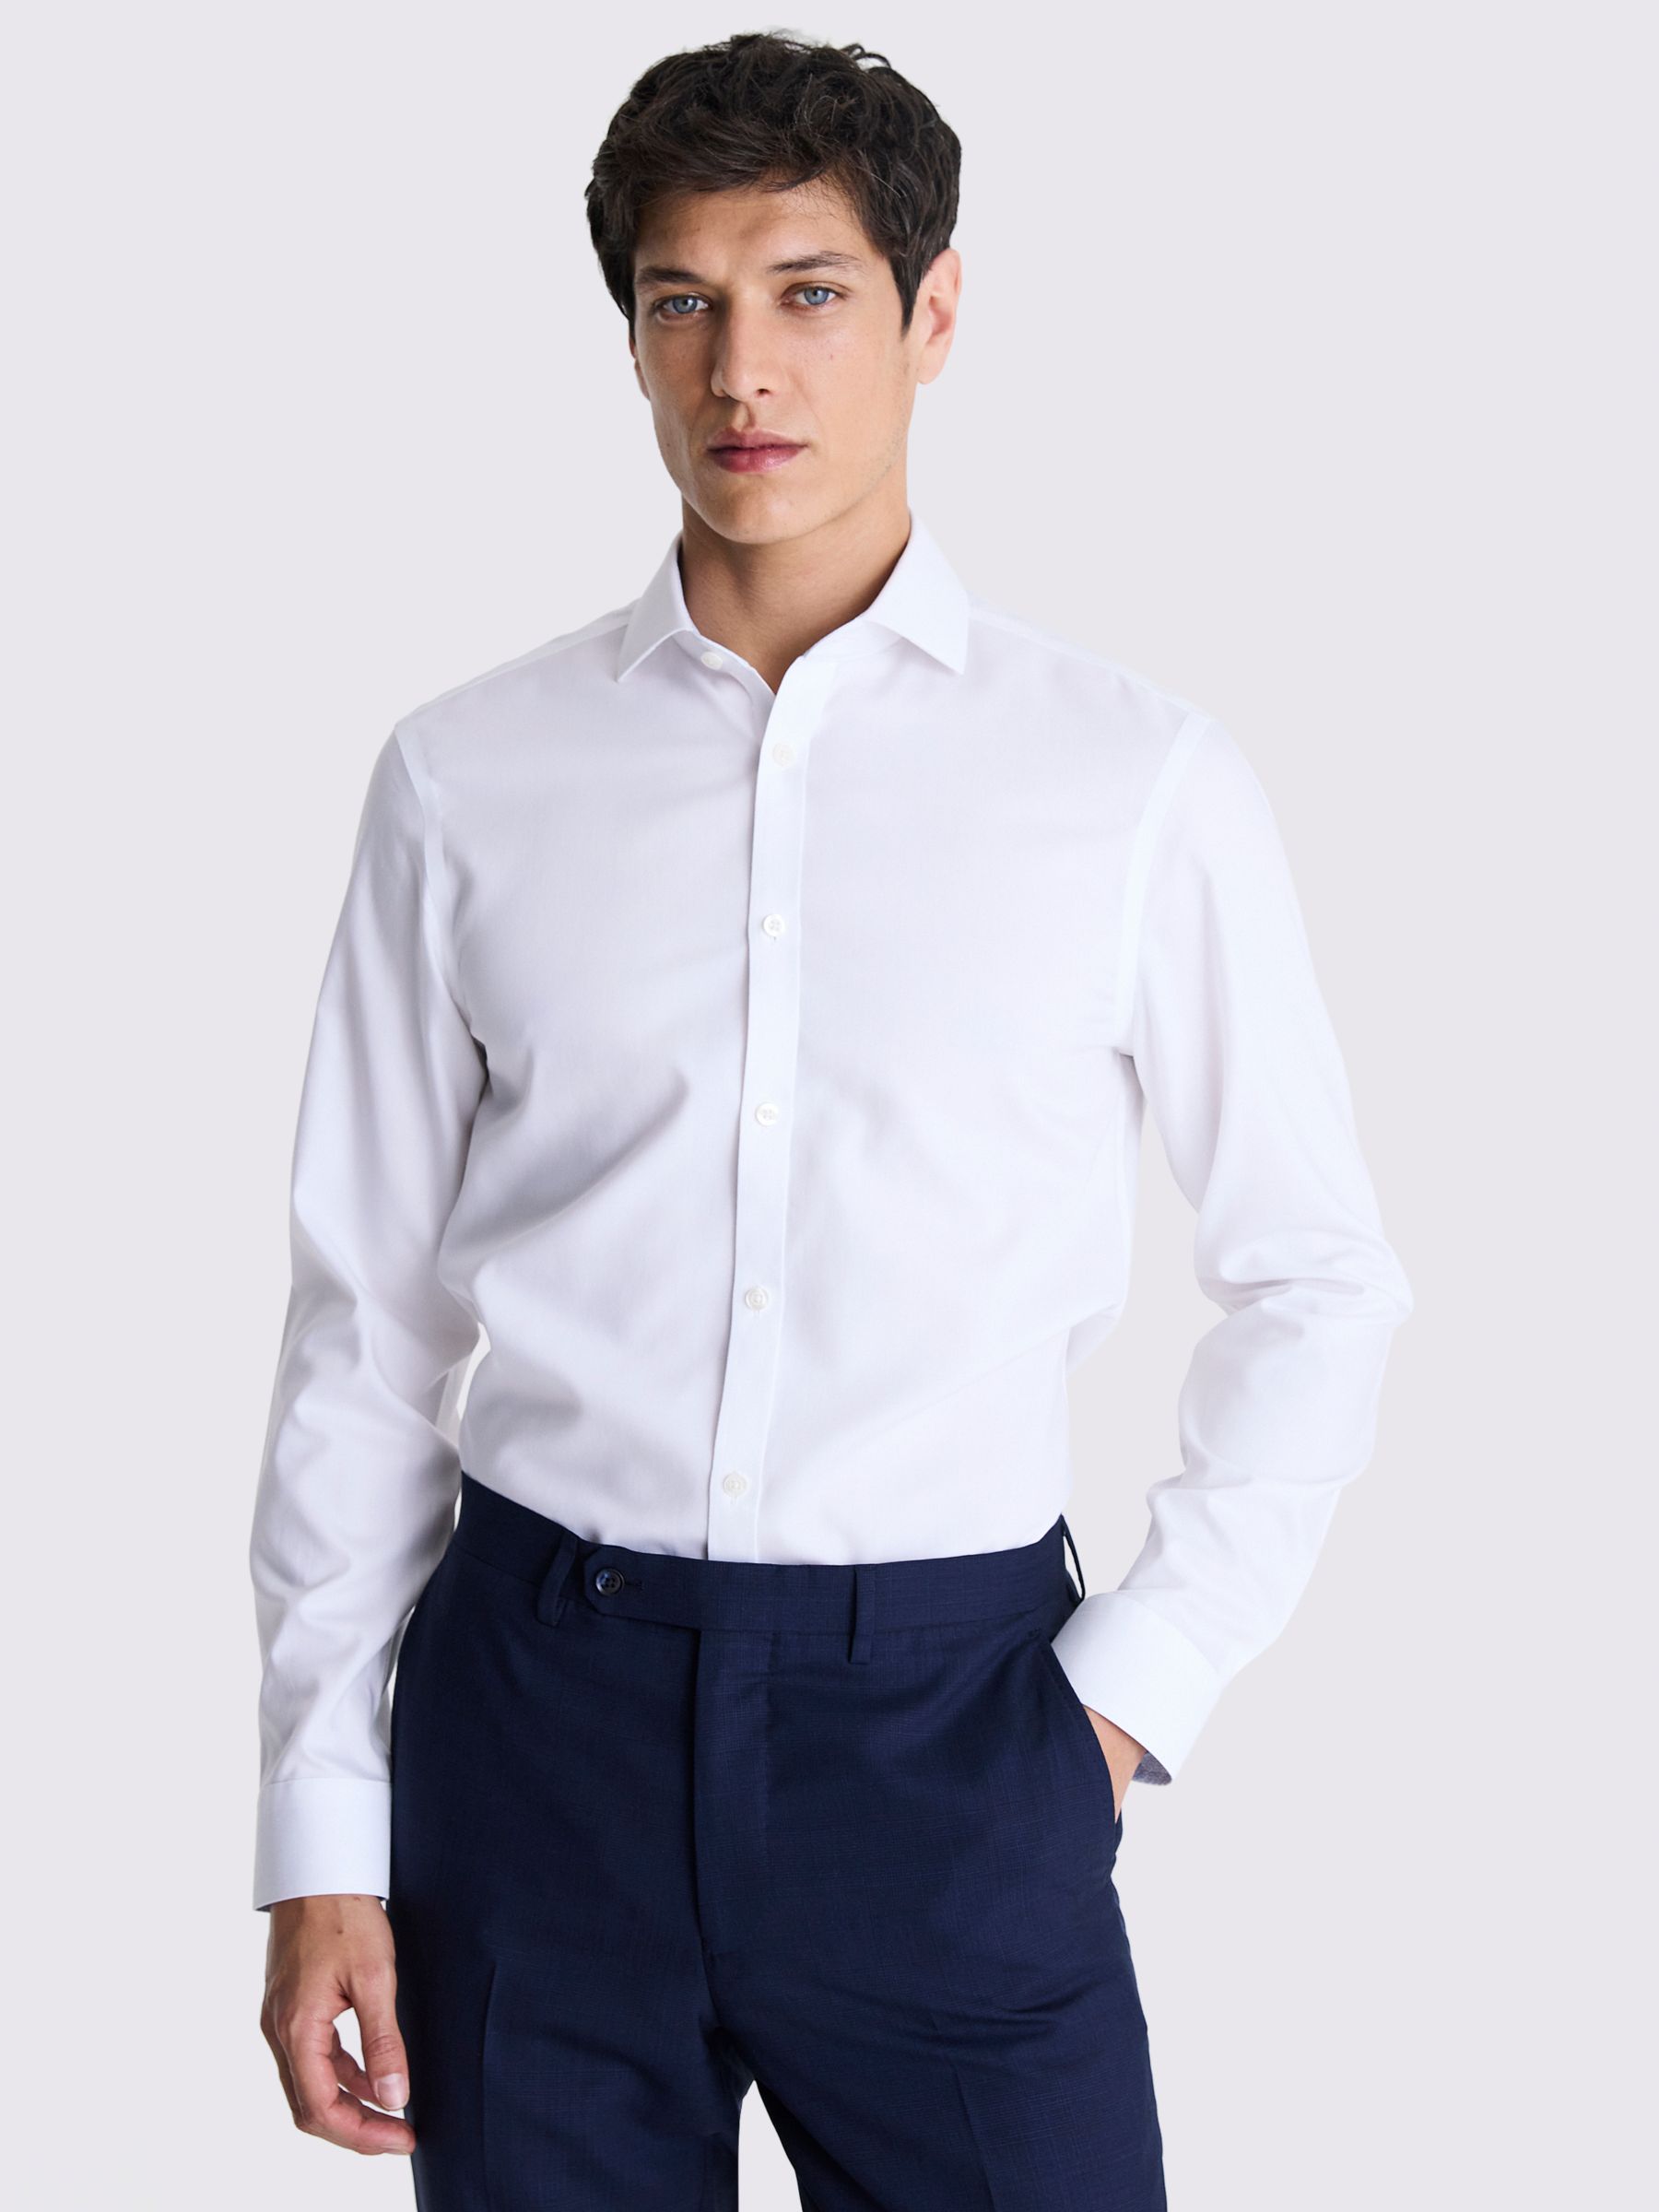 Moss Slim Fit Pinpoint Oxford Contrast Non Iron Shirt, White, 16